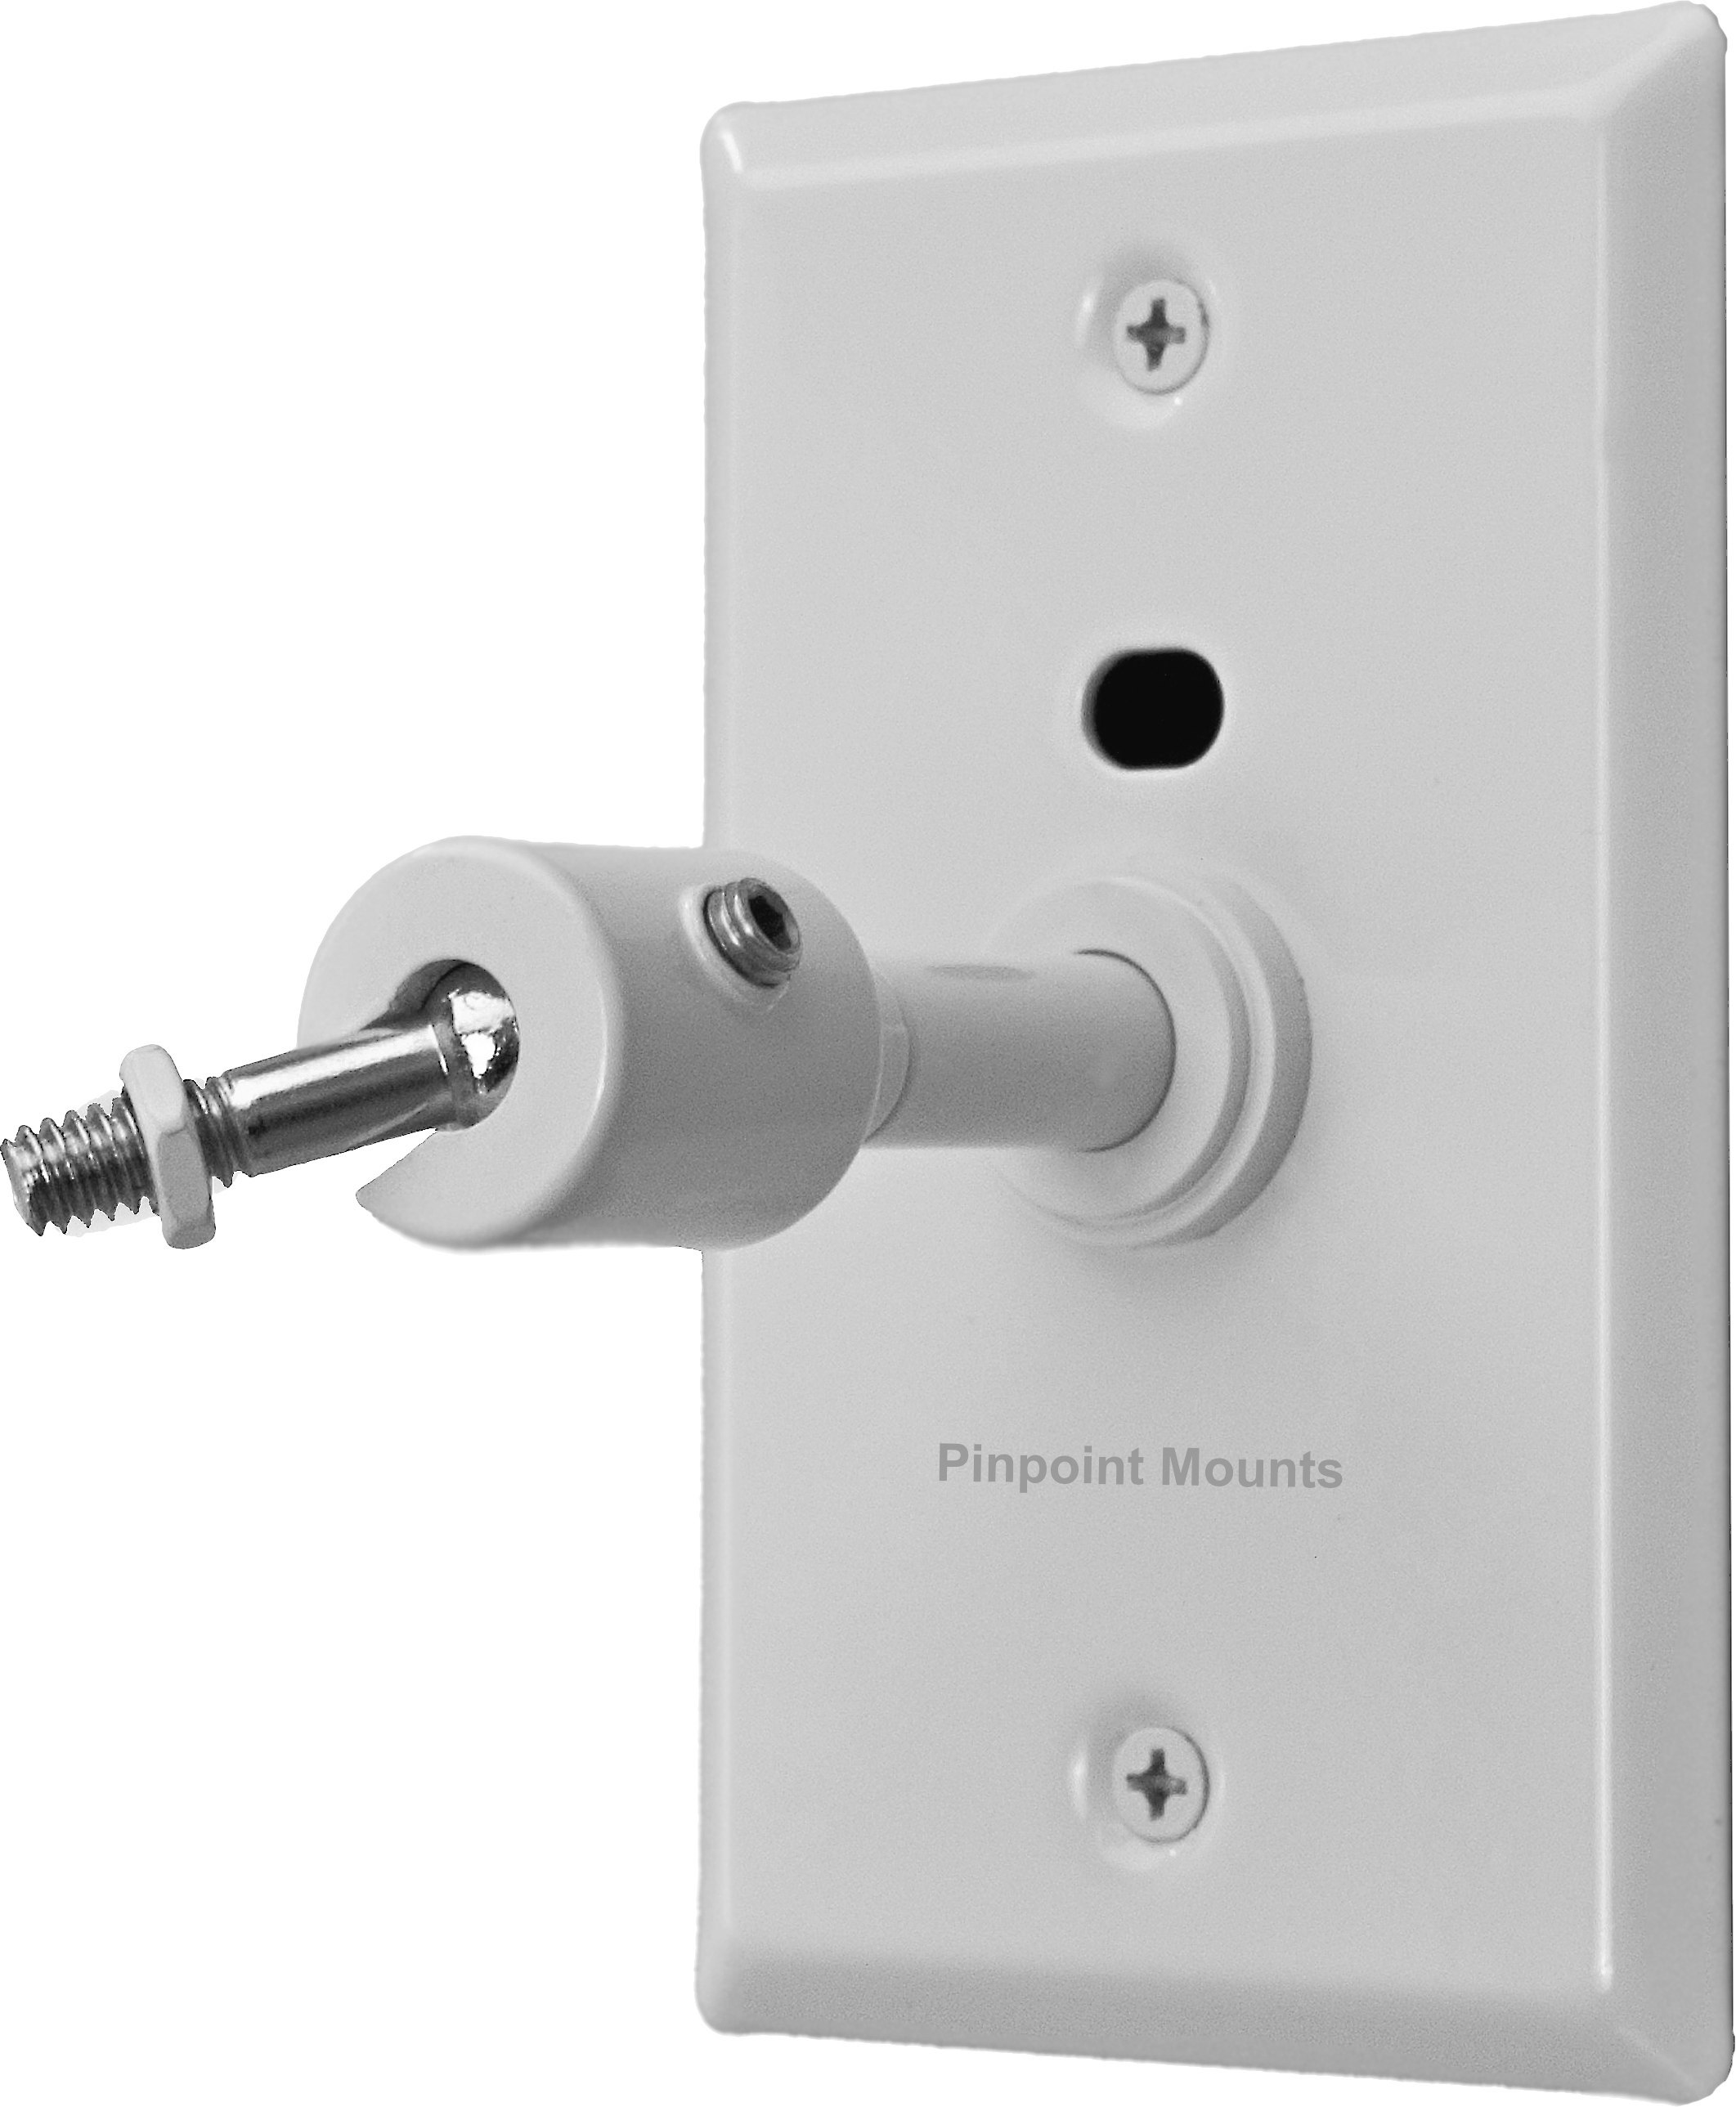 Pinpoint Am21 White Wall And Ceiling Mount Speaker Bracket At Crutchfield